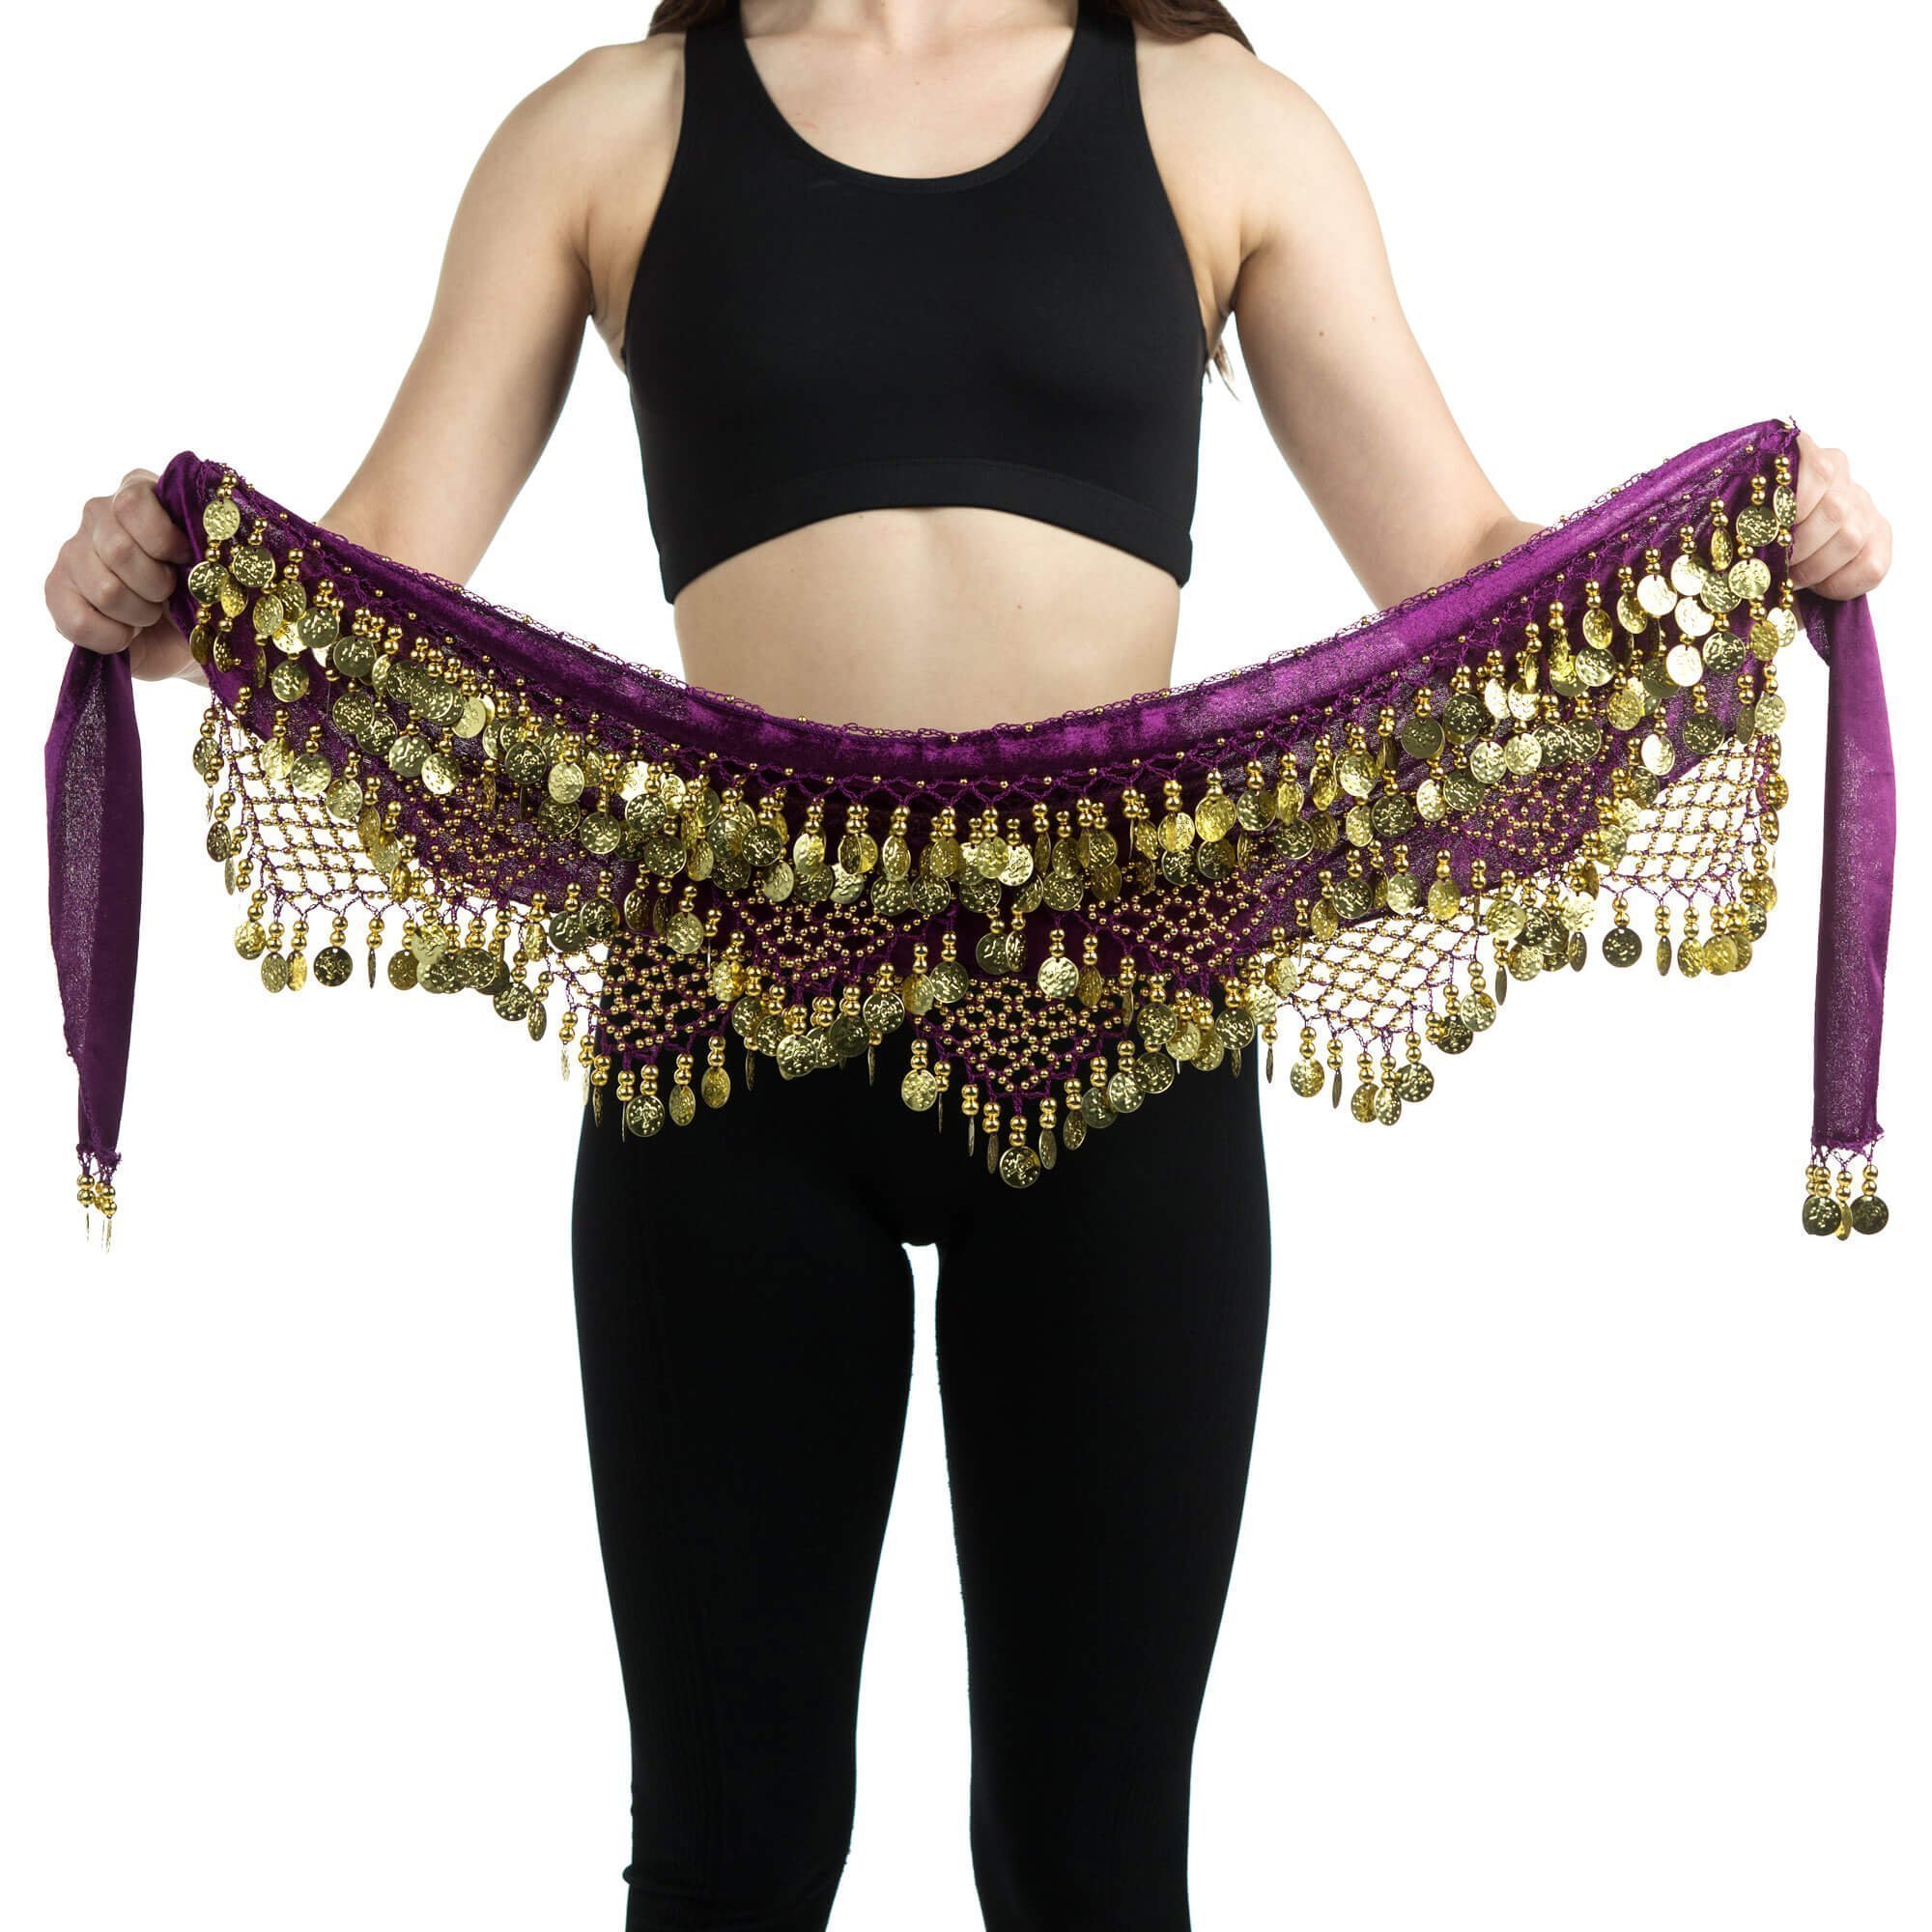 Danzcue Women's Belly Dance Hip Scarf With Gold Coins - Click Image to Close